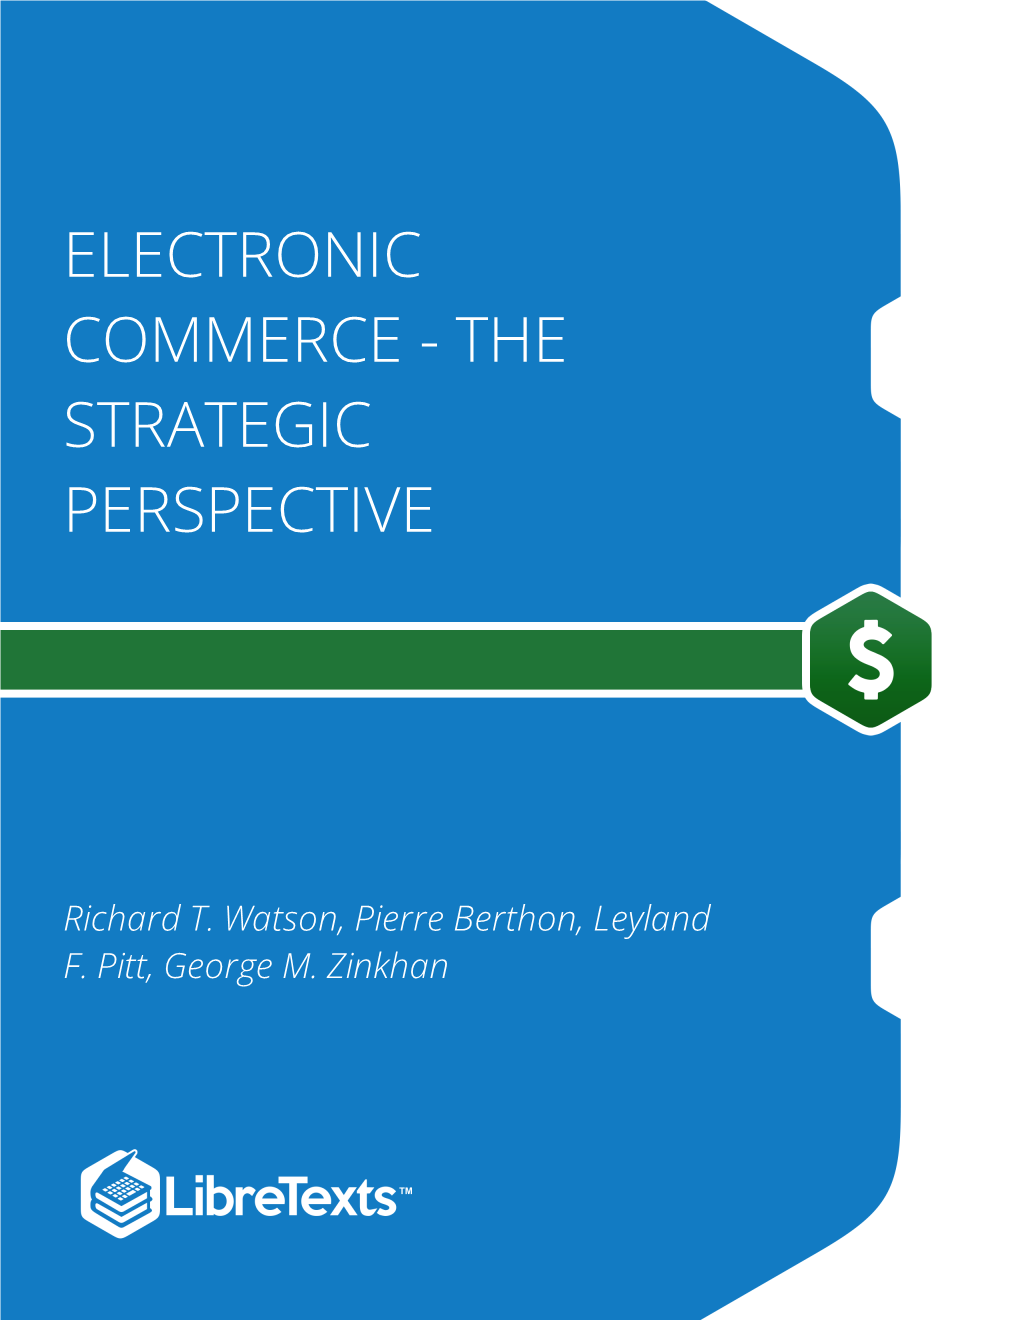 Electronic Commerce - the Strategic Perspective